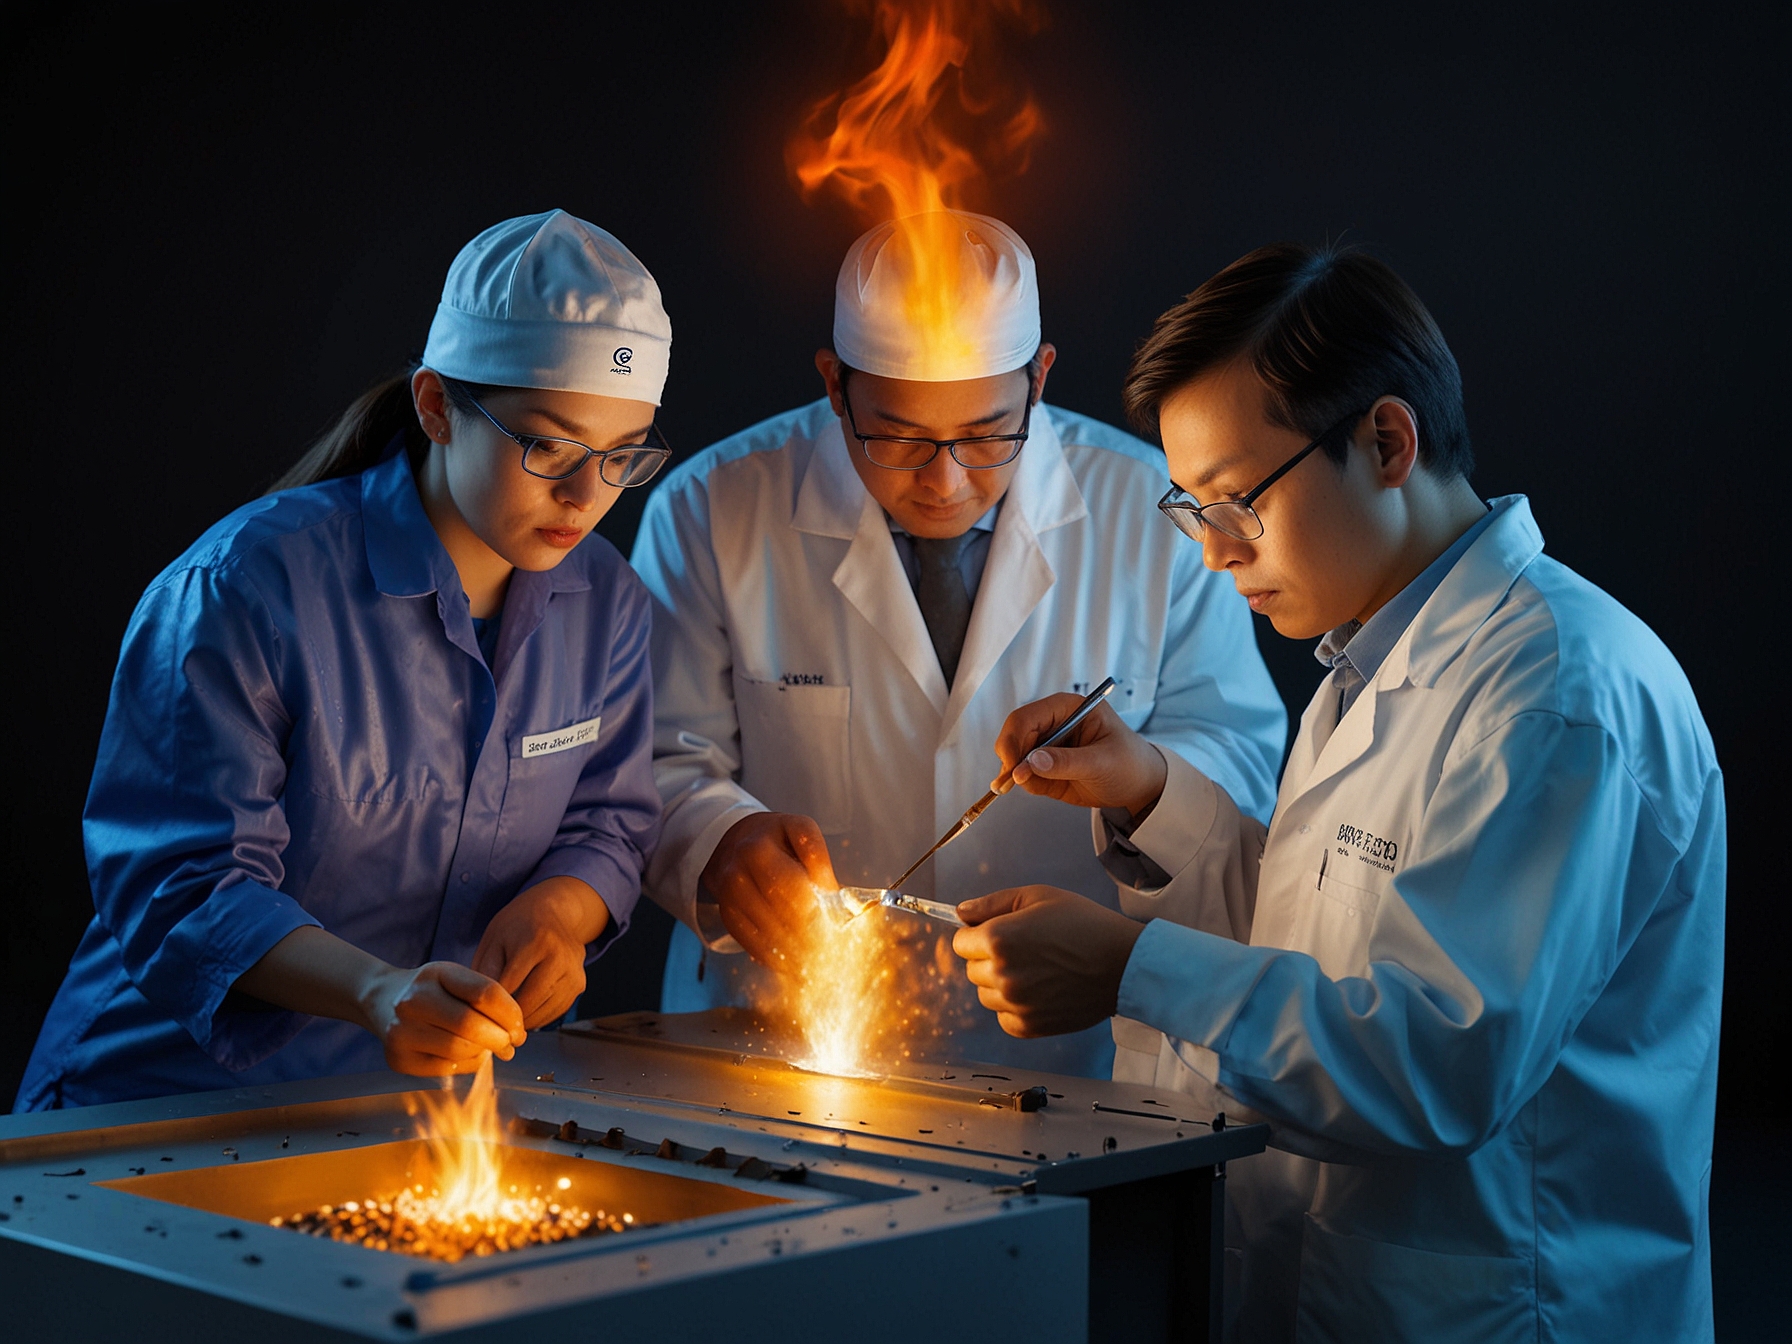 Researchers applying the innovative catalyst coating onto solid oxide fuel cell components. This four-minute process significantly enhances the performance and durability of SOFCs.